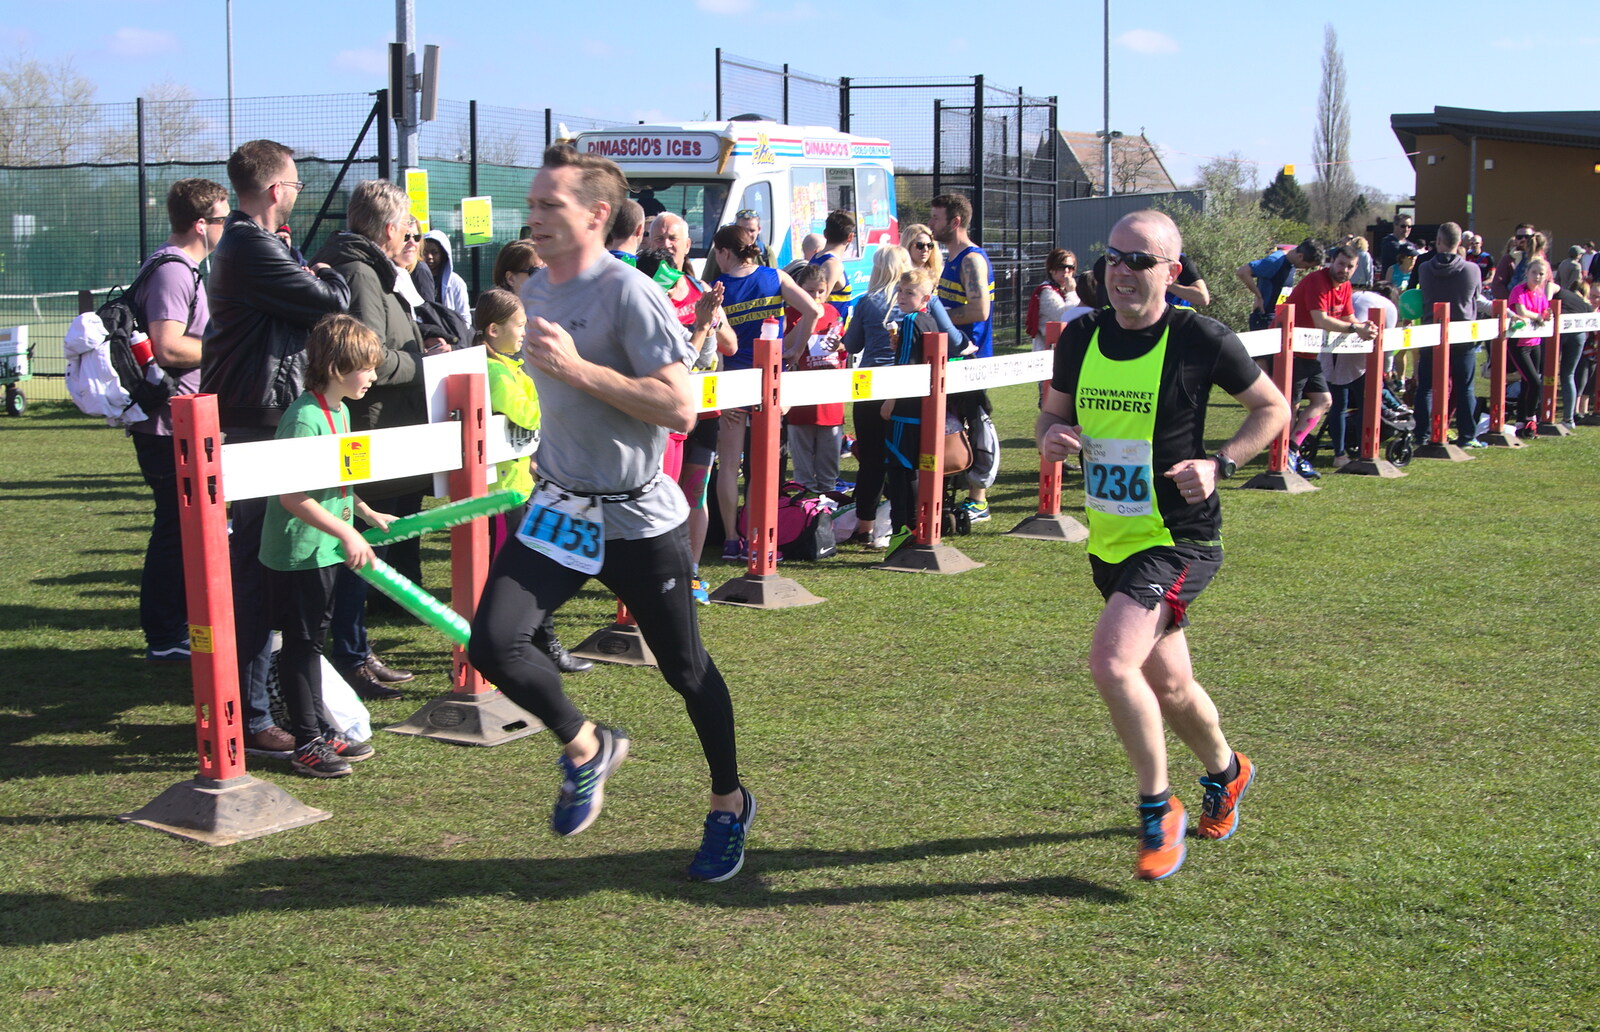 Some 10k runners cross the line from The Black Dog Festival of Running, Bungay, Suffolk - 2nd April 2017